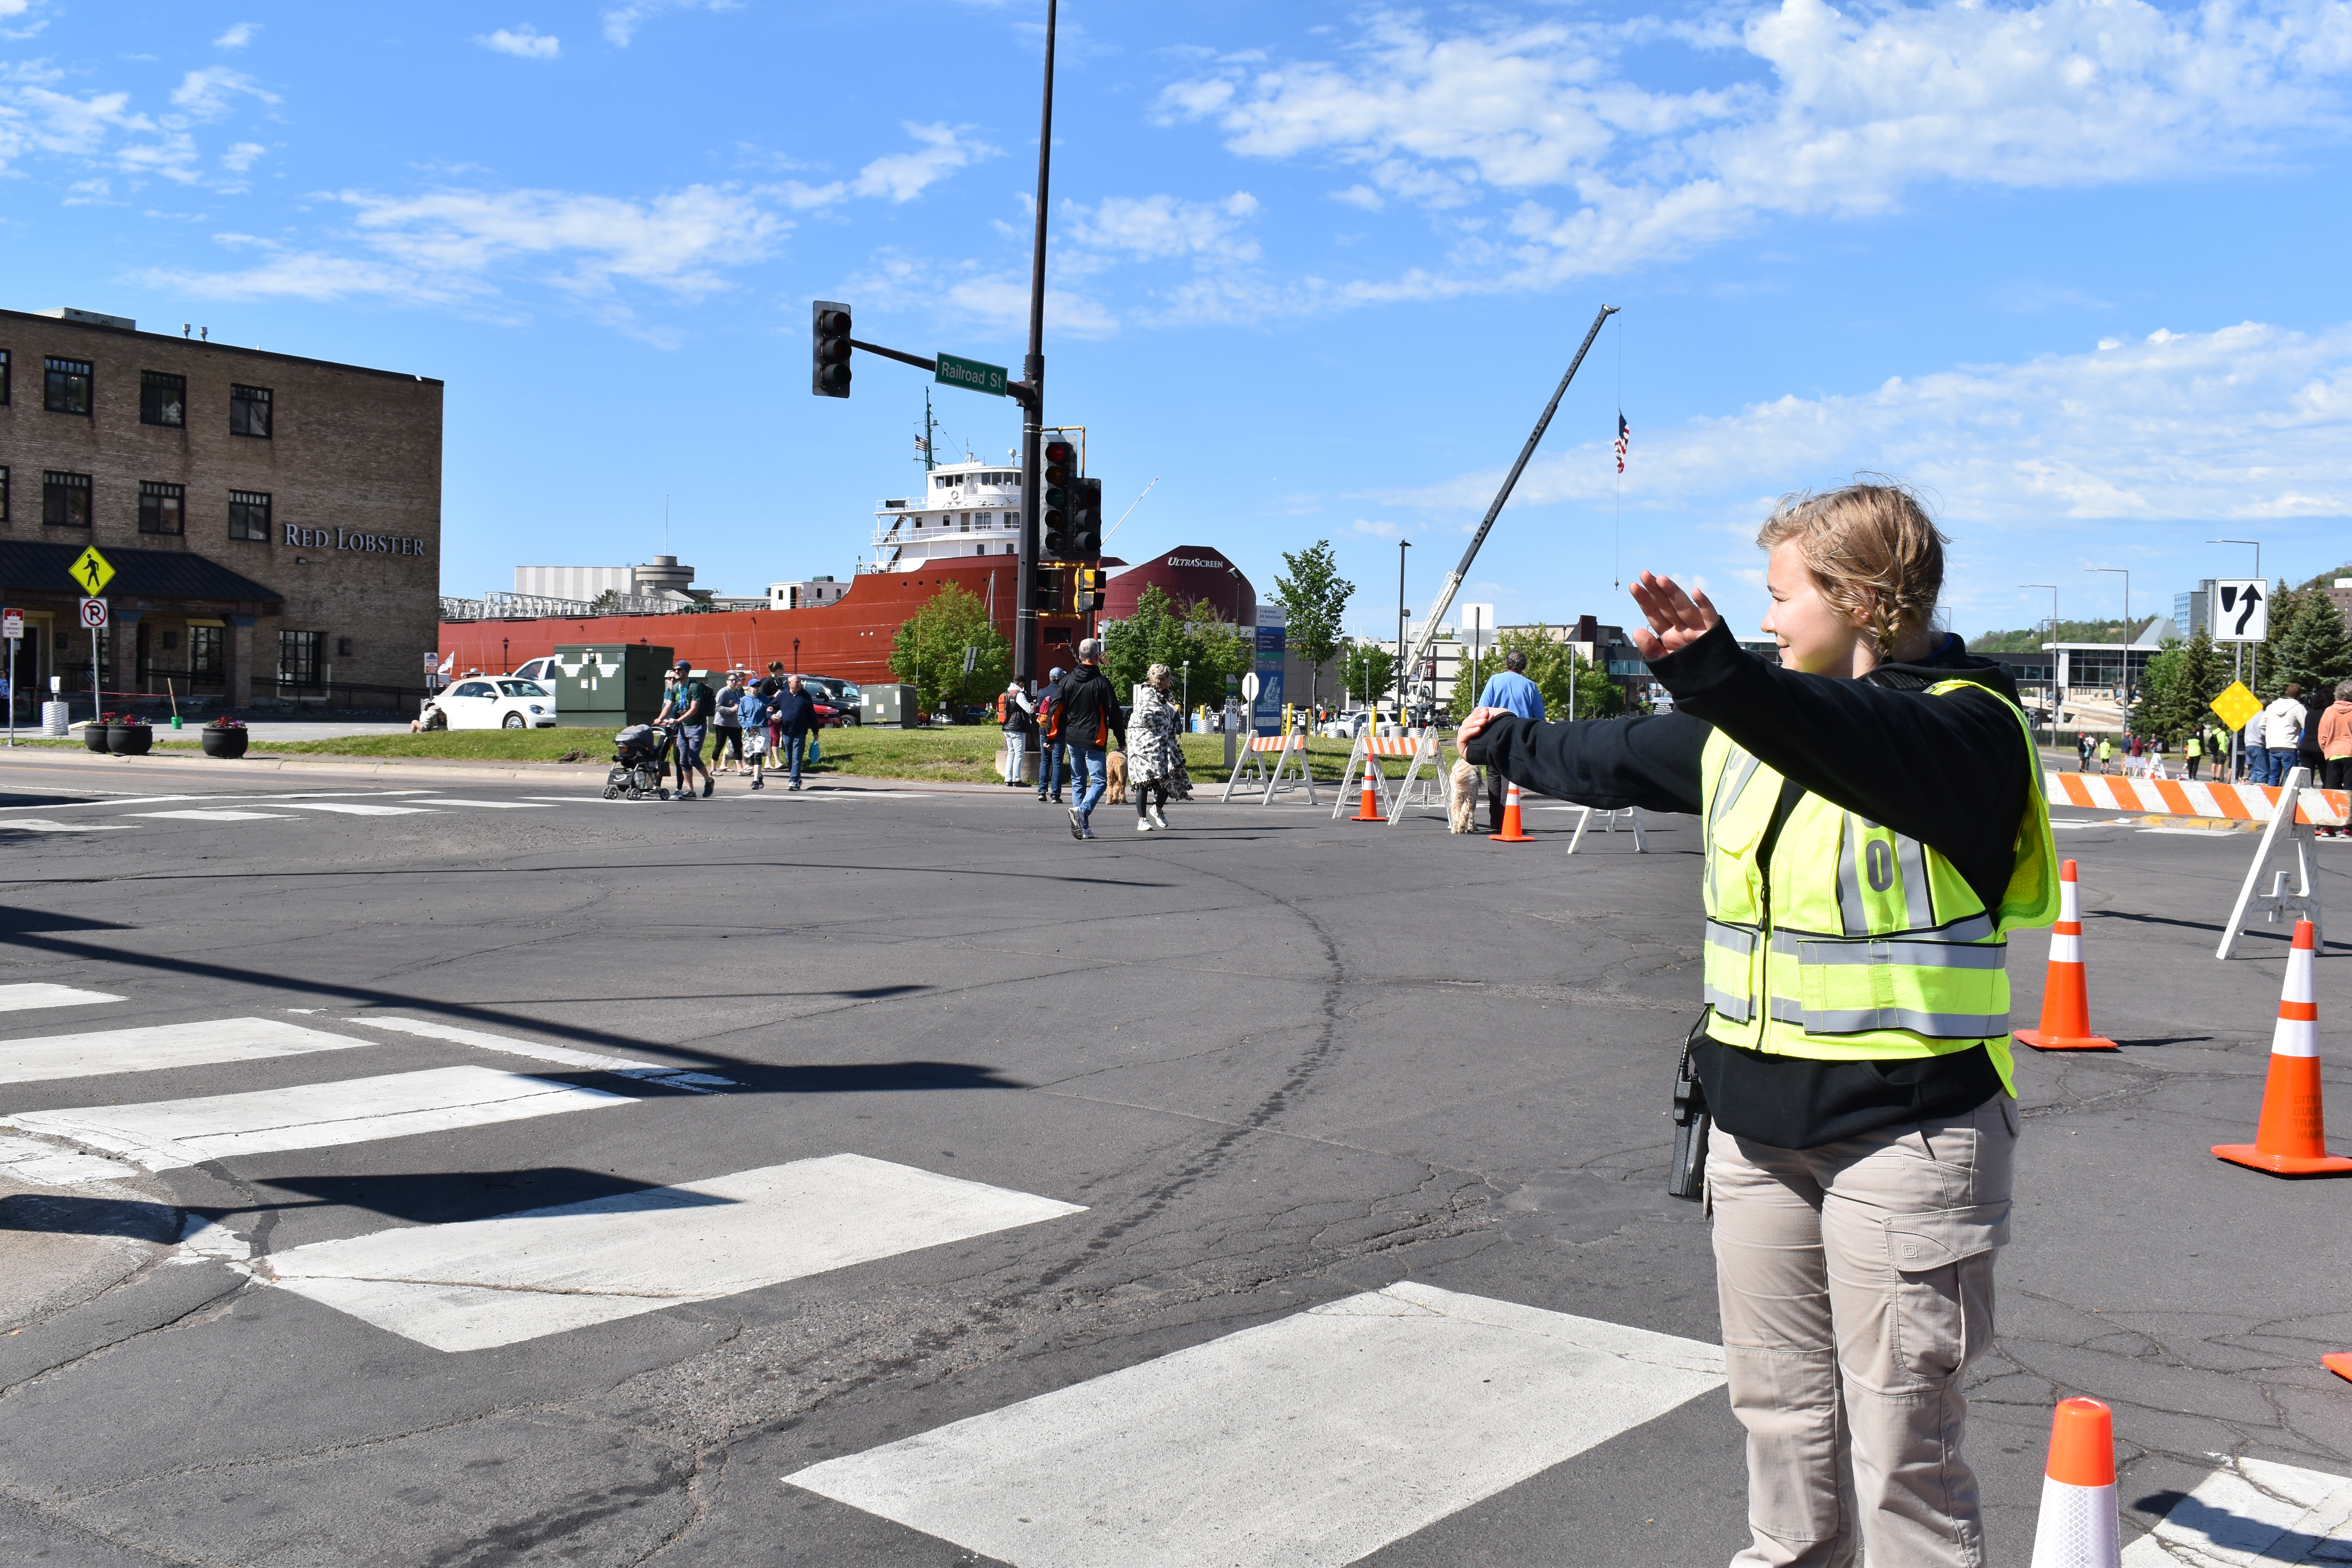 Community Service Officer-Intern Katie Latourelle (who is now a sworn police officer) helps direct traffic during the Grandmas Marathon.